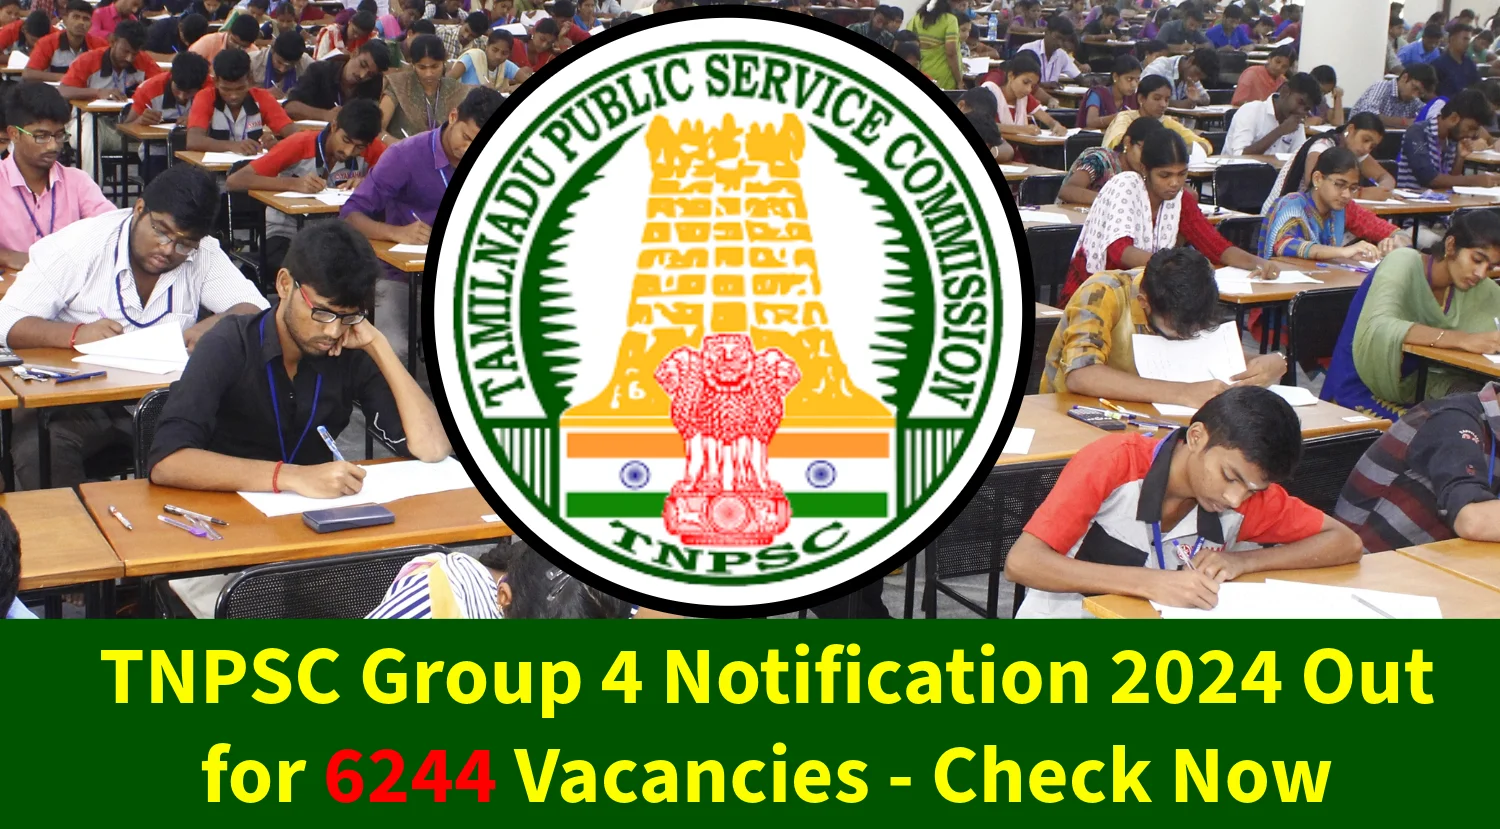 TNPSC Group 4 Notification 2024 Out for 6244 Vacancies Check Now